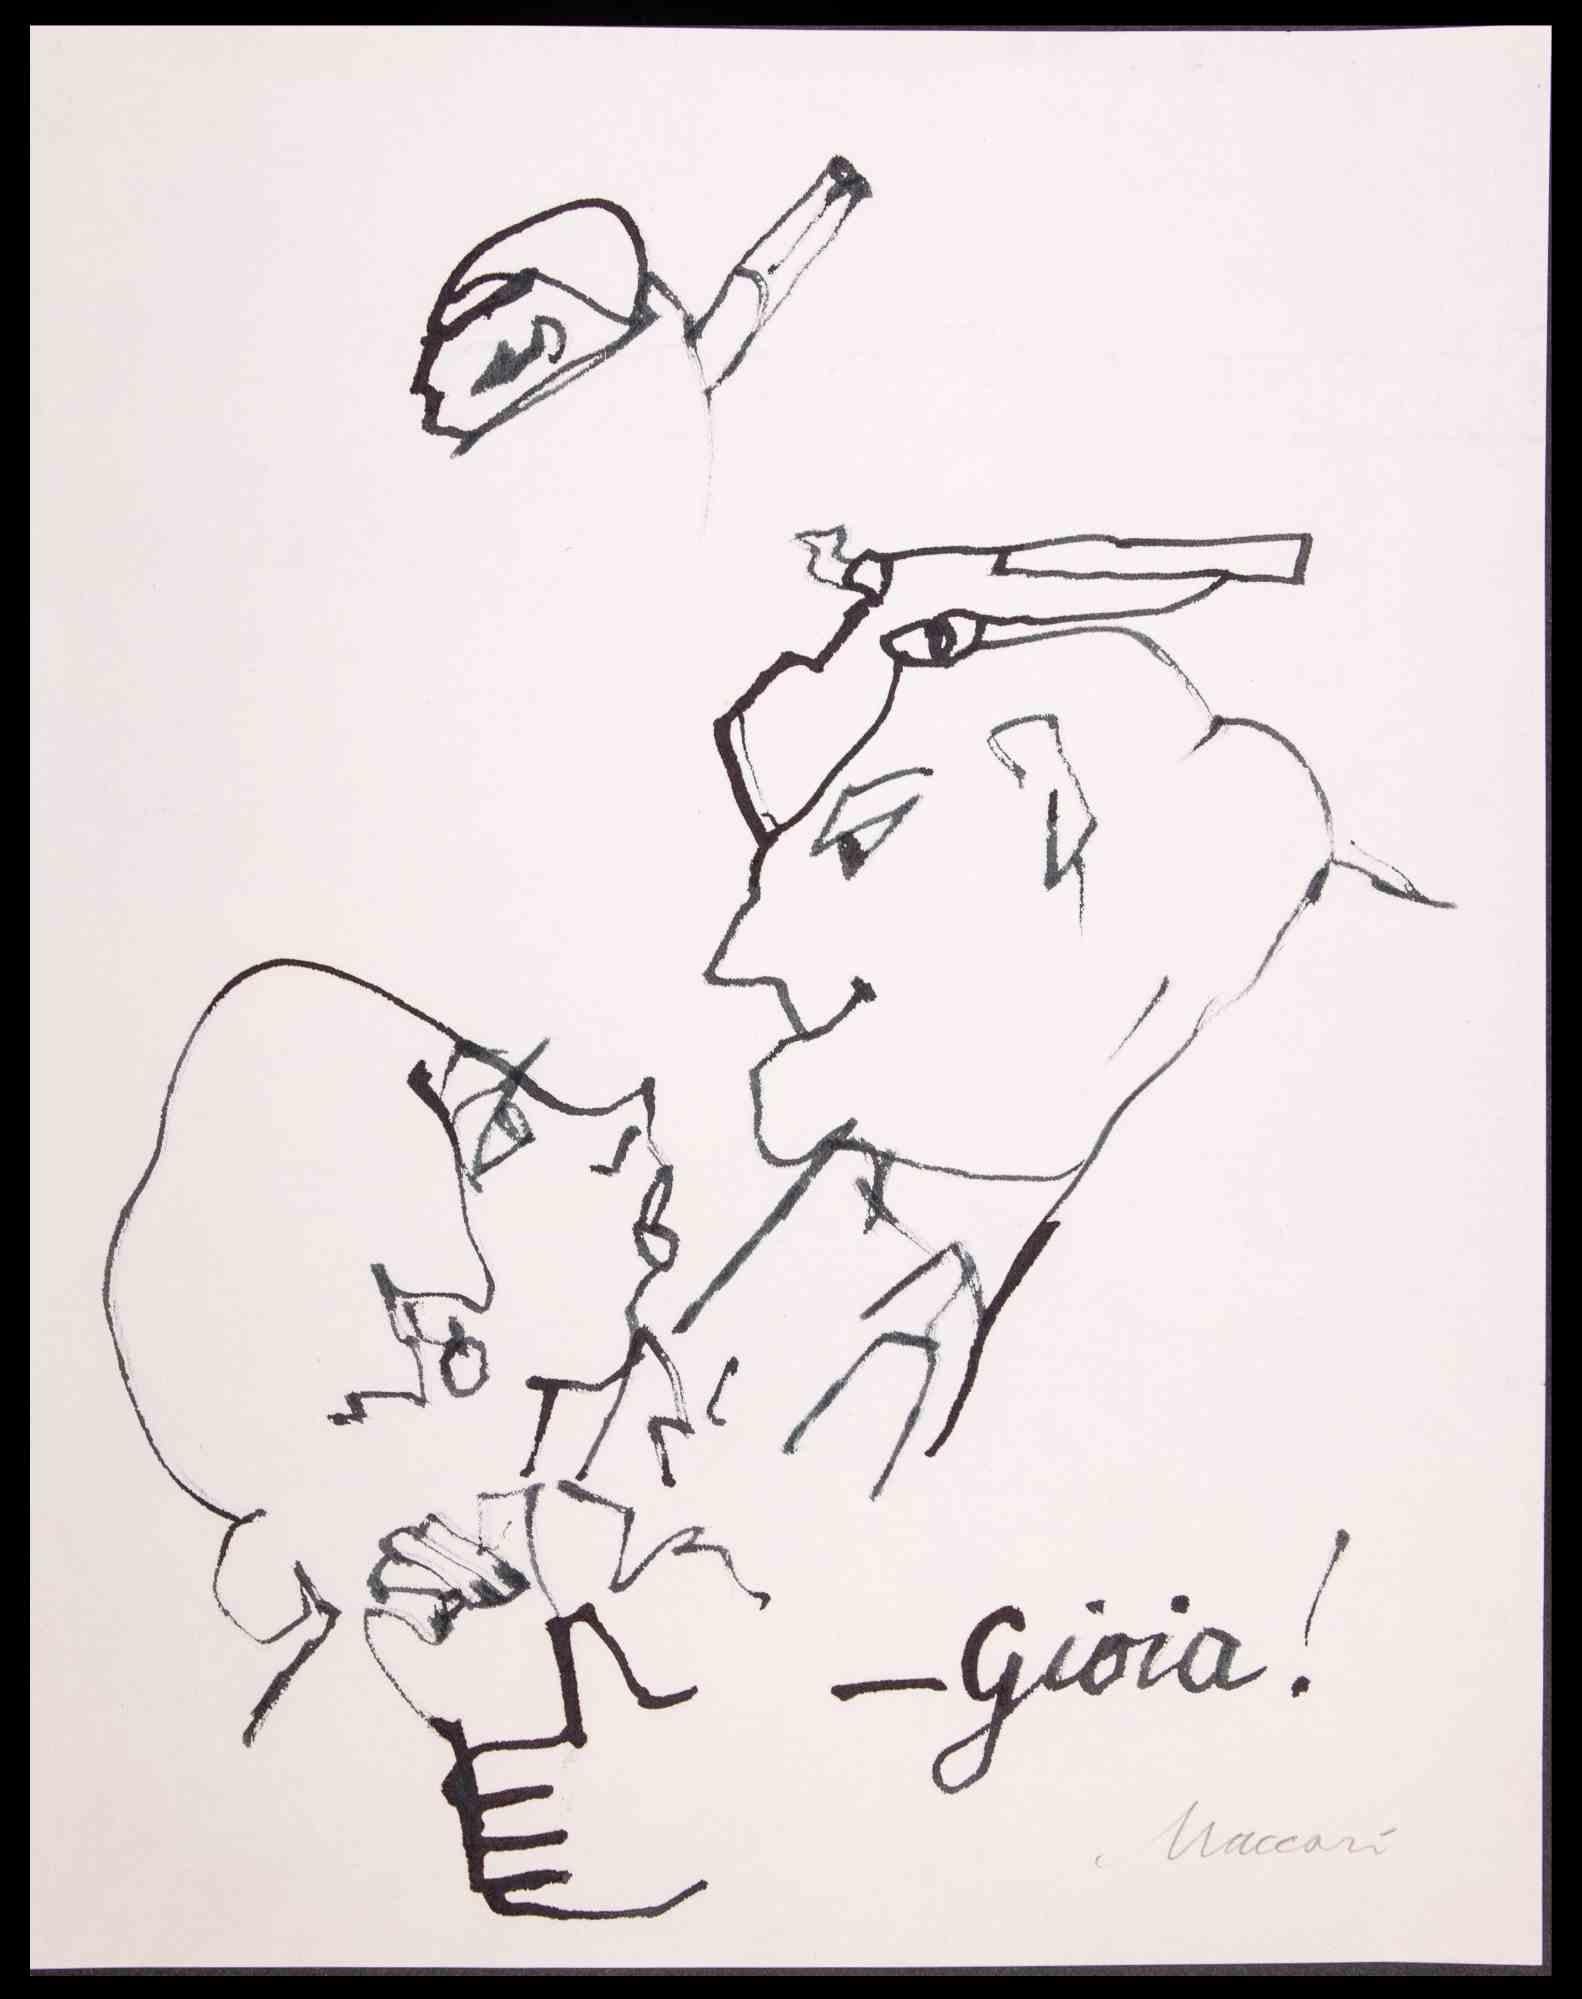 Mr. Gioia is a China Ink Drawing realized by Mino Maccari (1924-1989) in 1970s.

Hand-signed on the lower margin.

Good condition on a white paper.

Mino Maccari (Siena, 1924-Rome, June 16, 1989) was an Italian writer, painter, engraver and